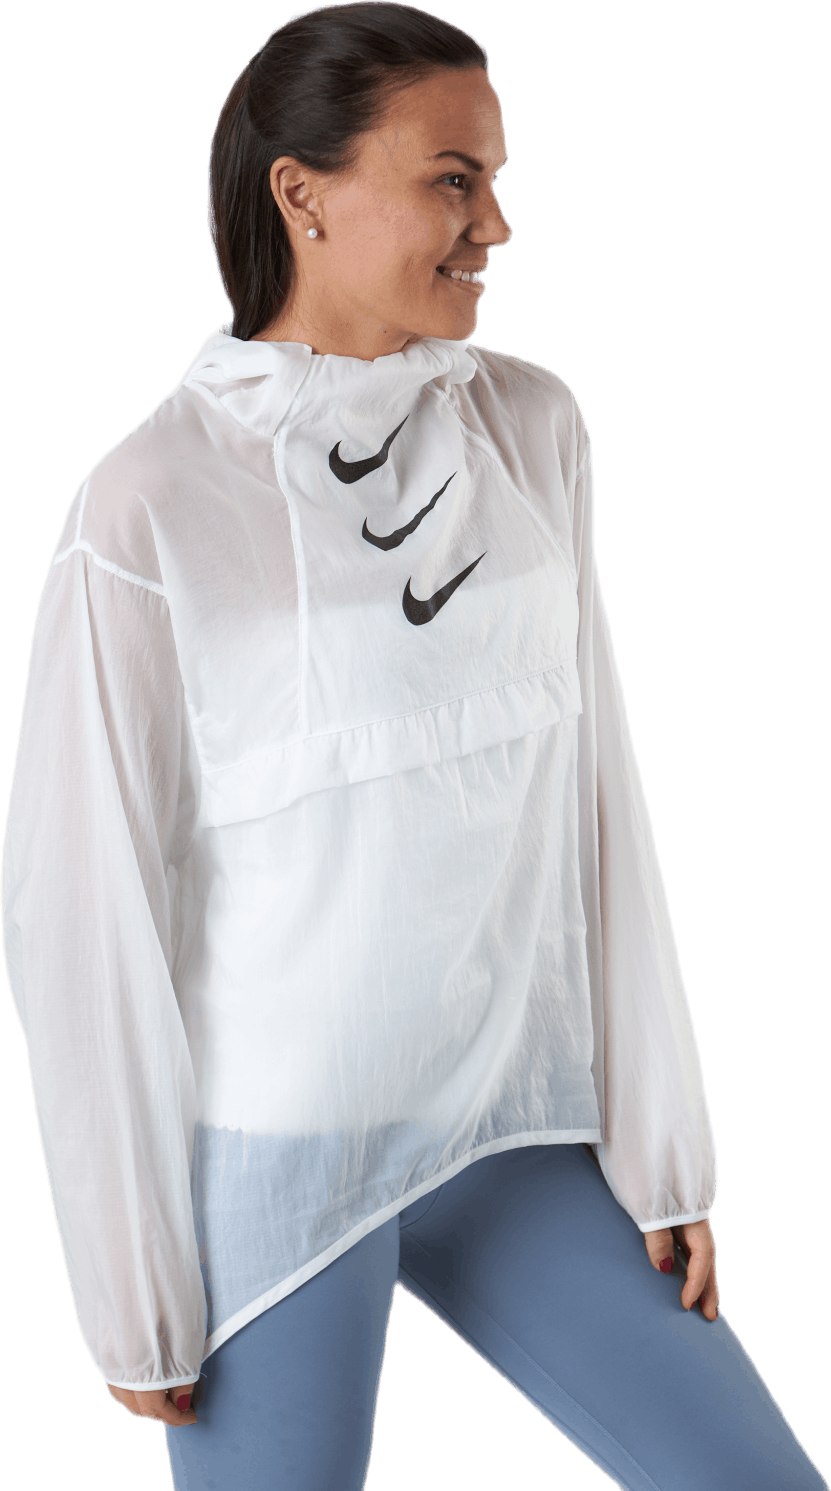 Run Division Packable Jacket White